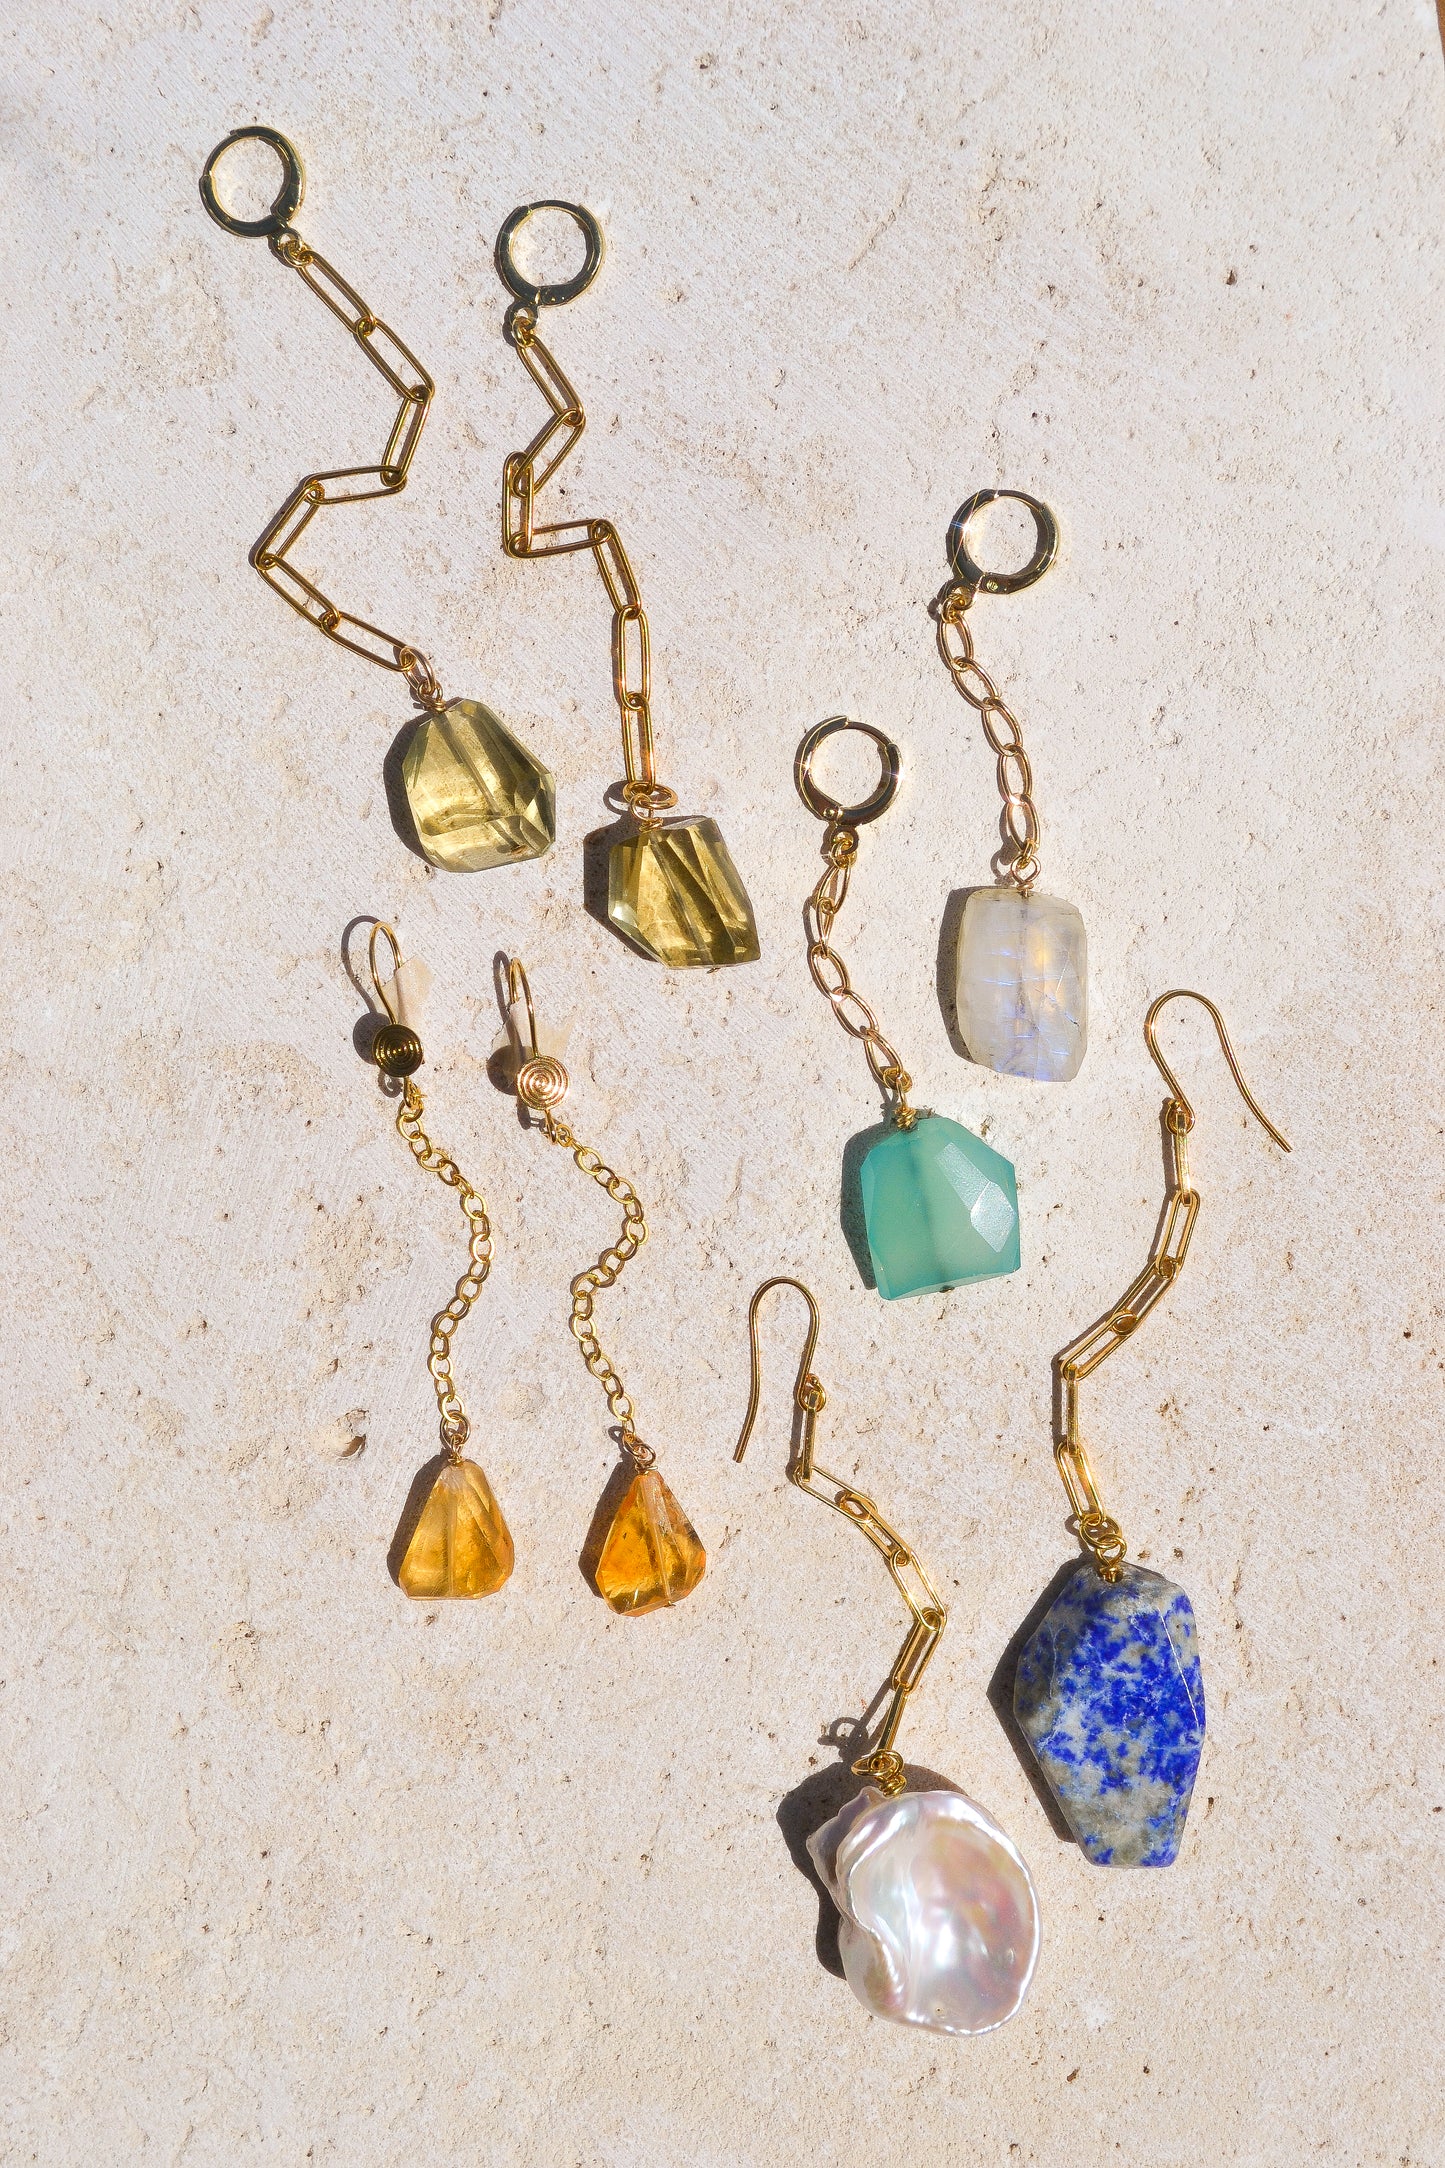 Chunky lemon quartz drop earrings on gold fill paper clip chains on hinge back hoops. Designed in California by Carrie Marill and made by hand in her SoCal studio.